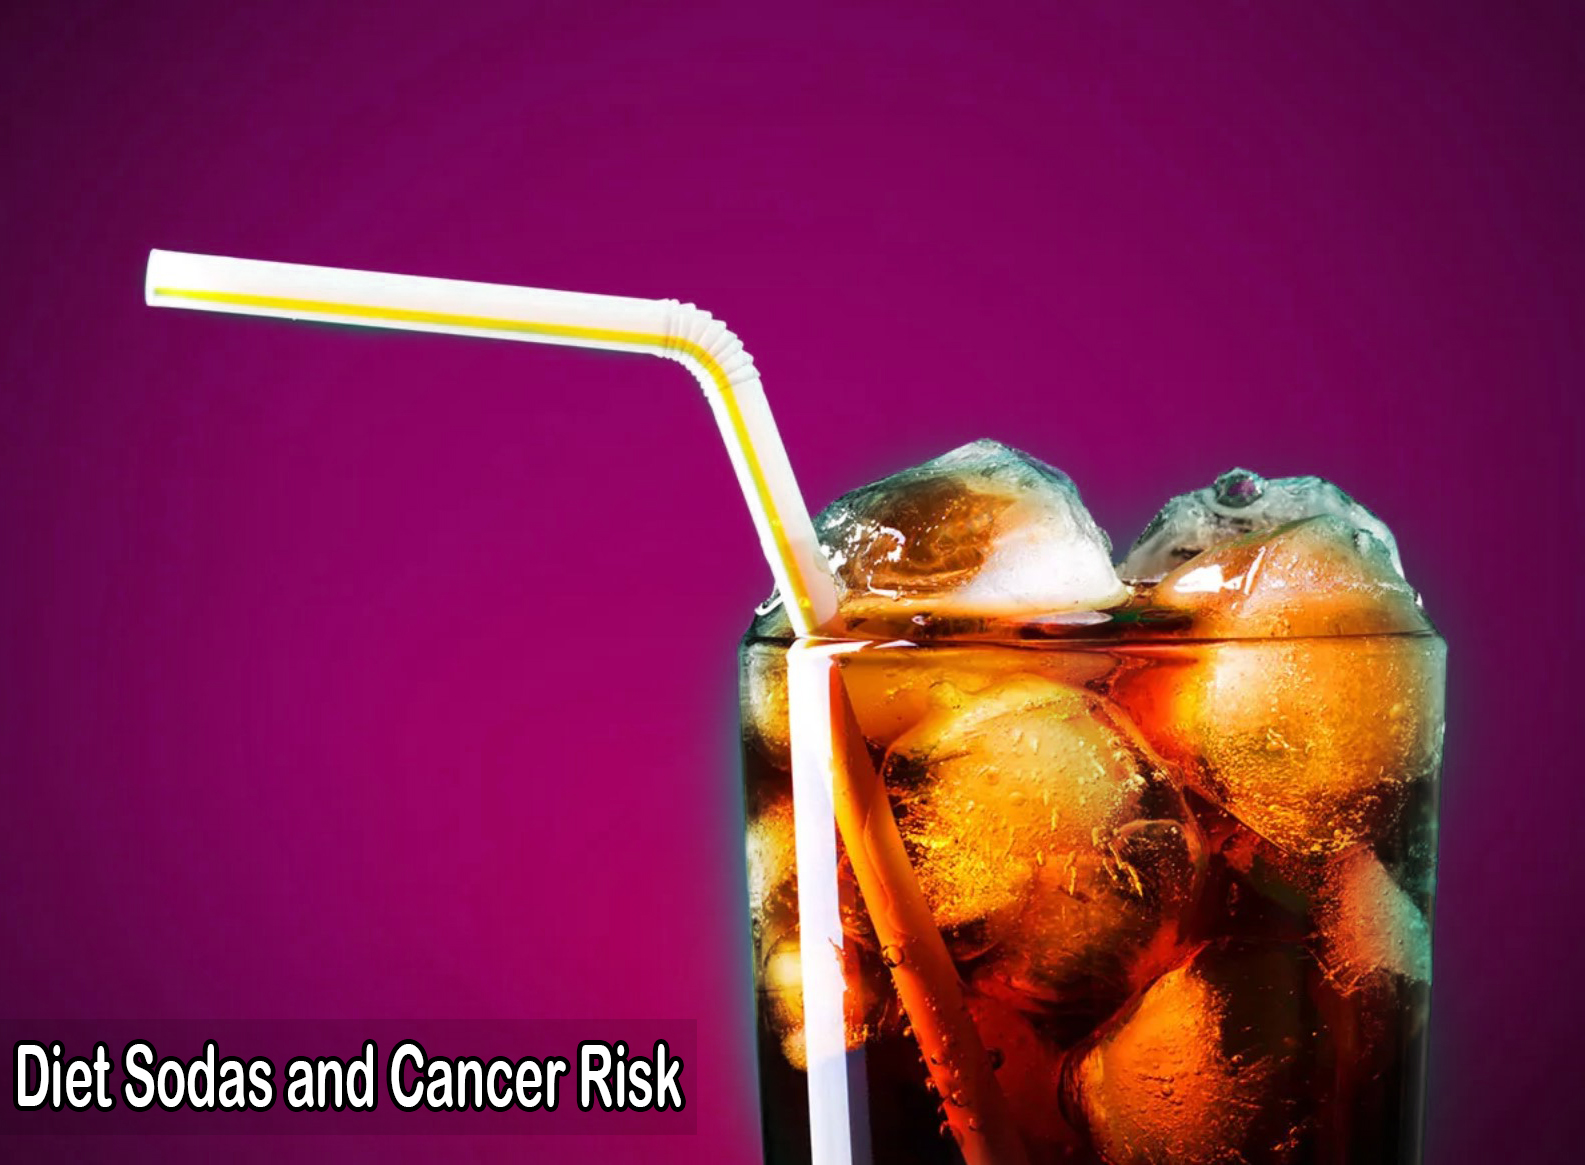 Diet Sodas and Cancer Risk